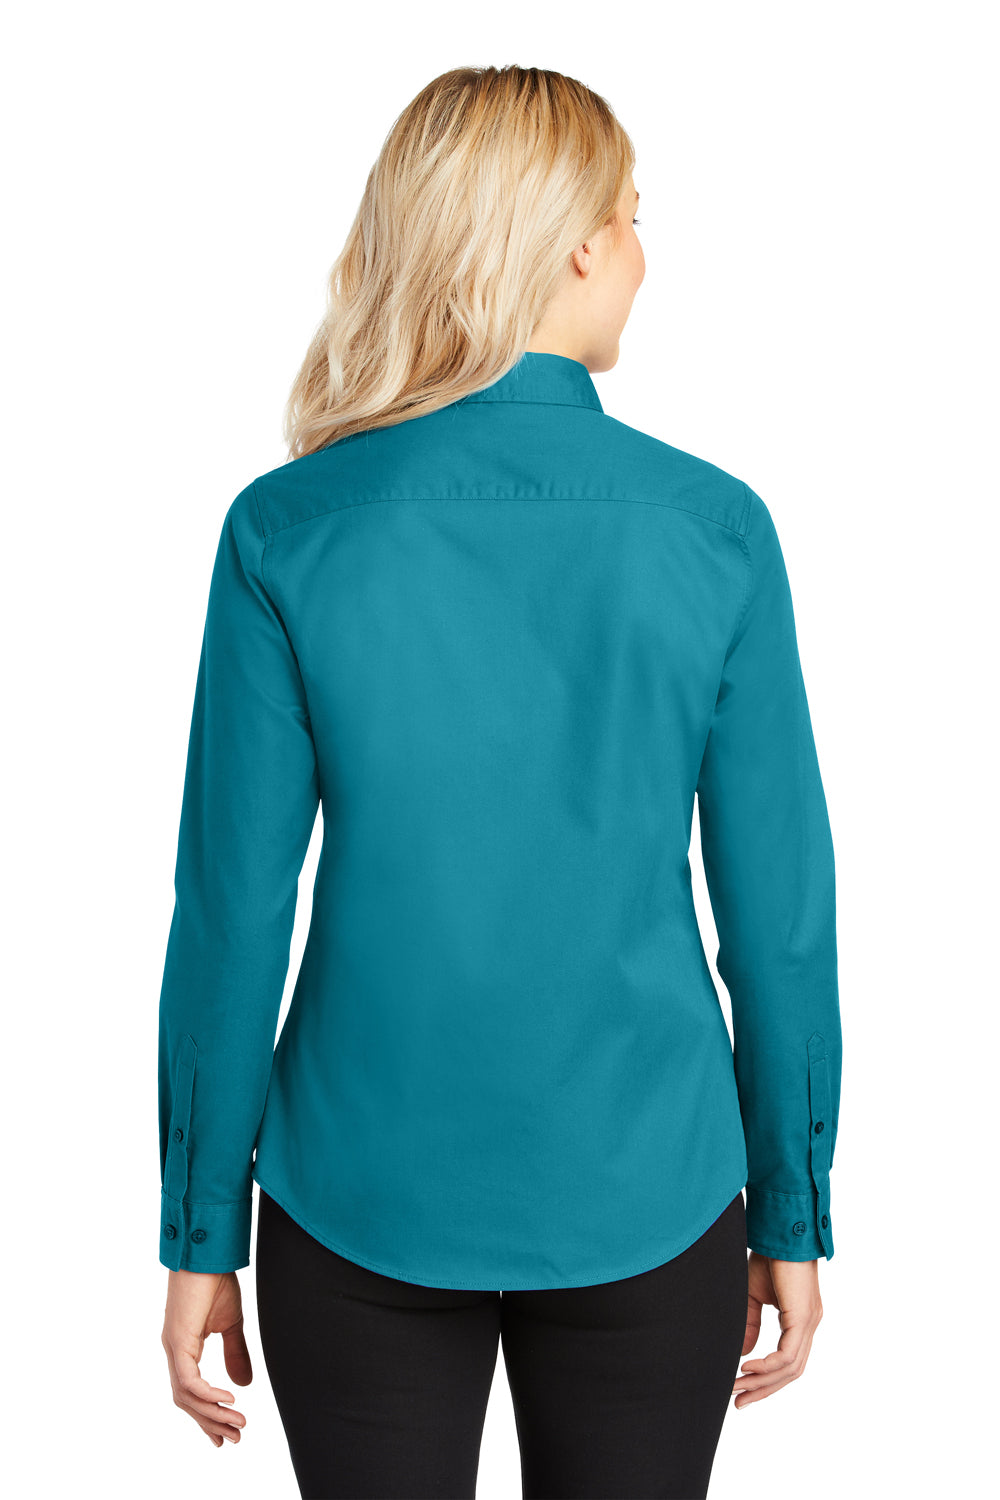 Port Authority L608 Womens Easy Care Wrinkle Resistant Long Sleeve Button Down Shirt Teal Green Back